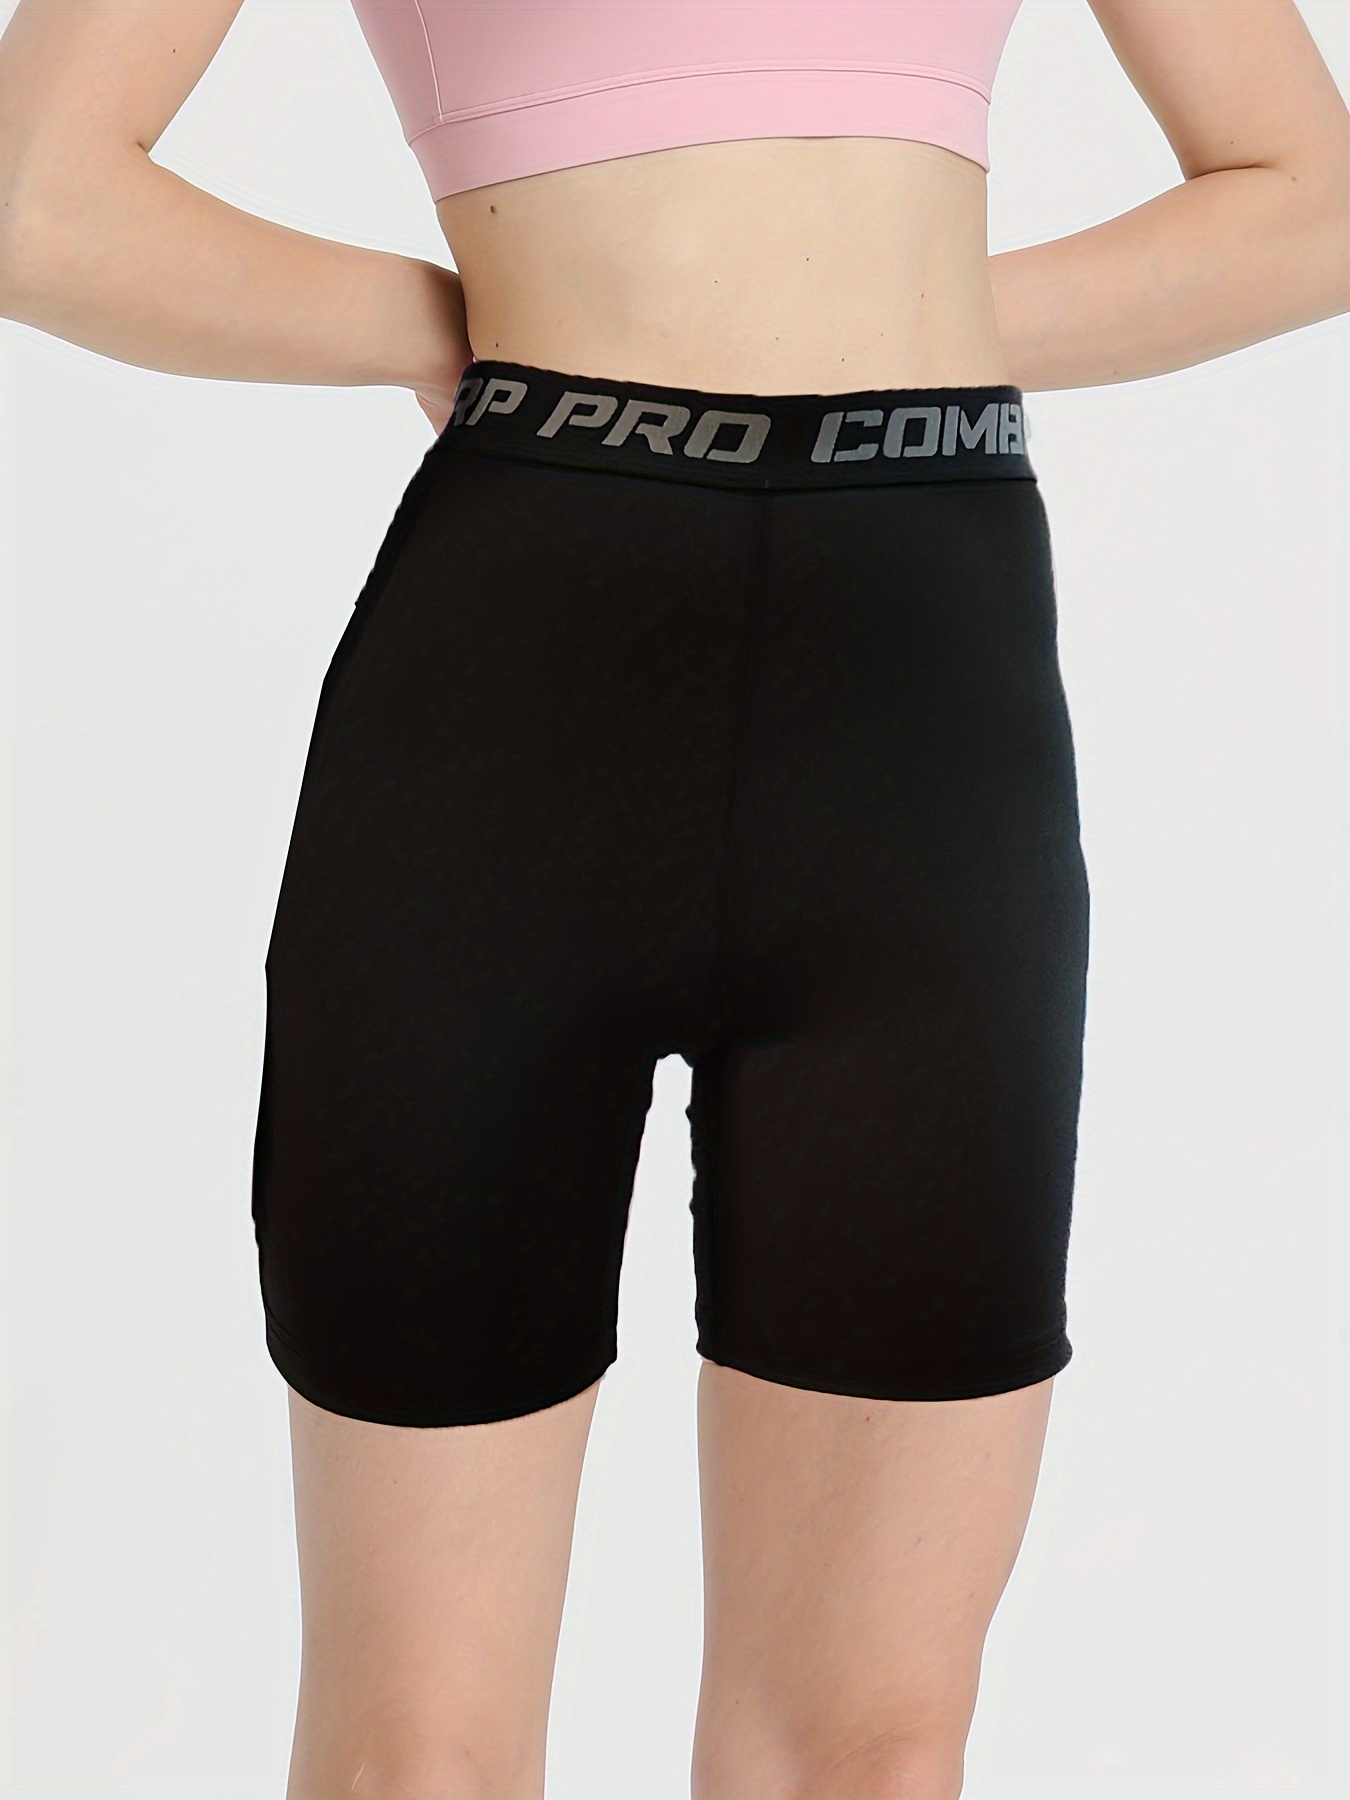 Women Safety Shorts for Sale New Zealand, New Collection Online